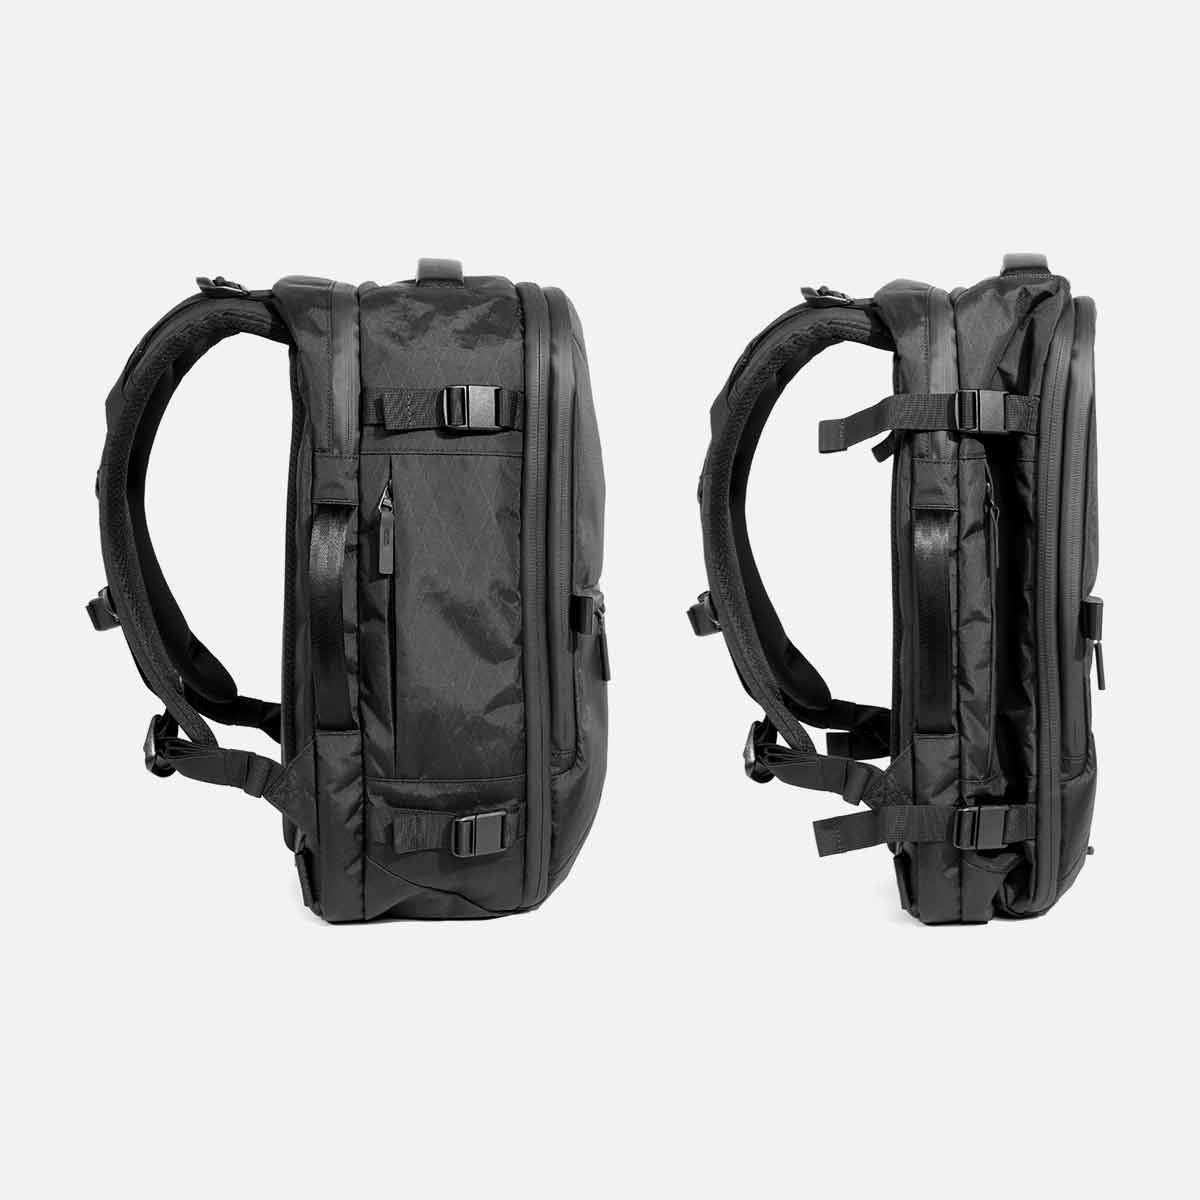 AER】Travel Pack 3 Small X-Pac(Free Black)｜ MSPCプロダクト ソート